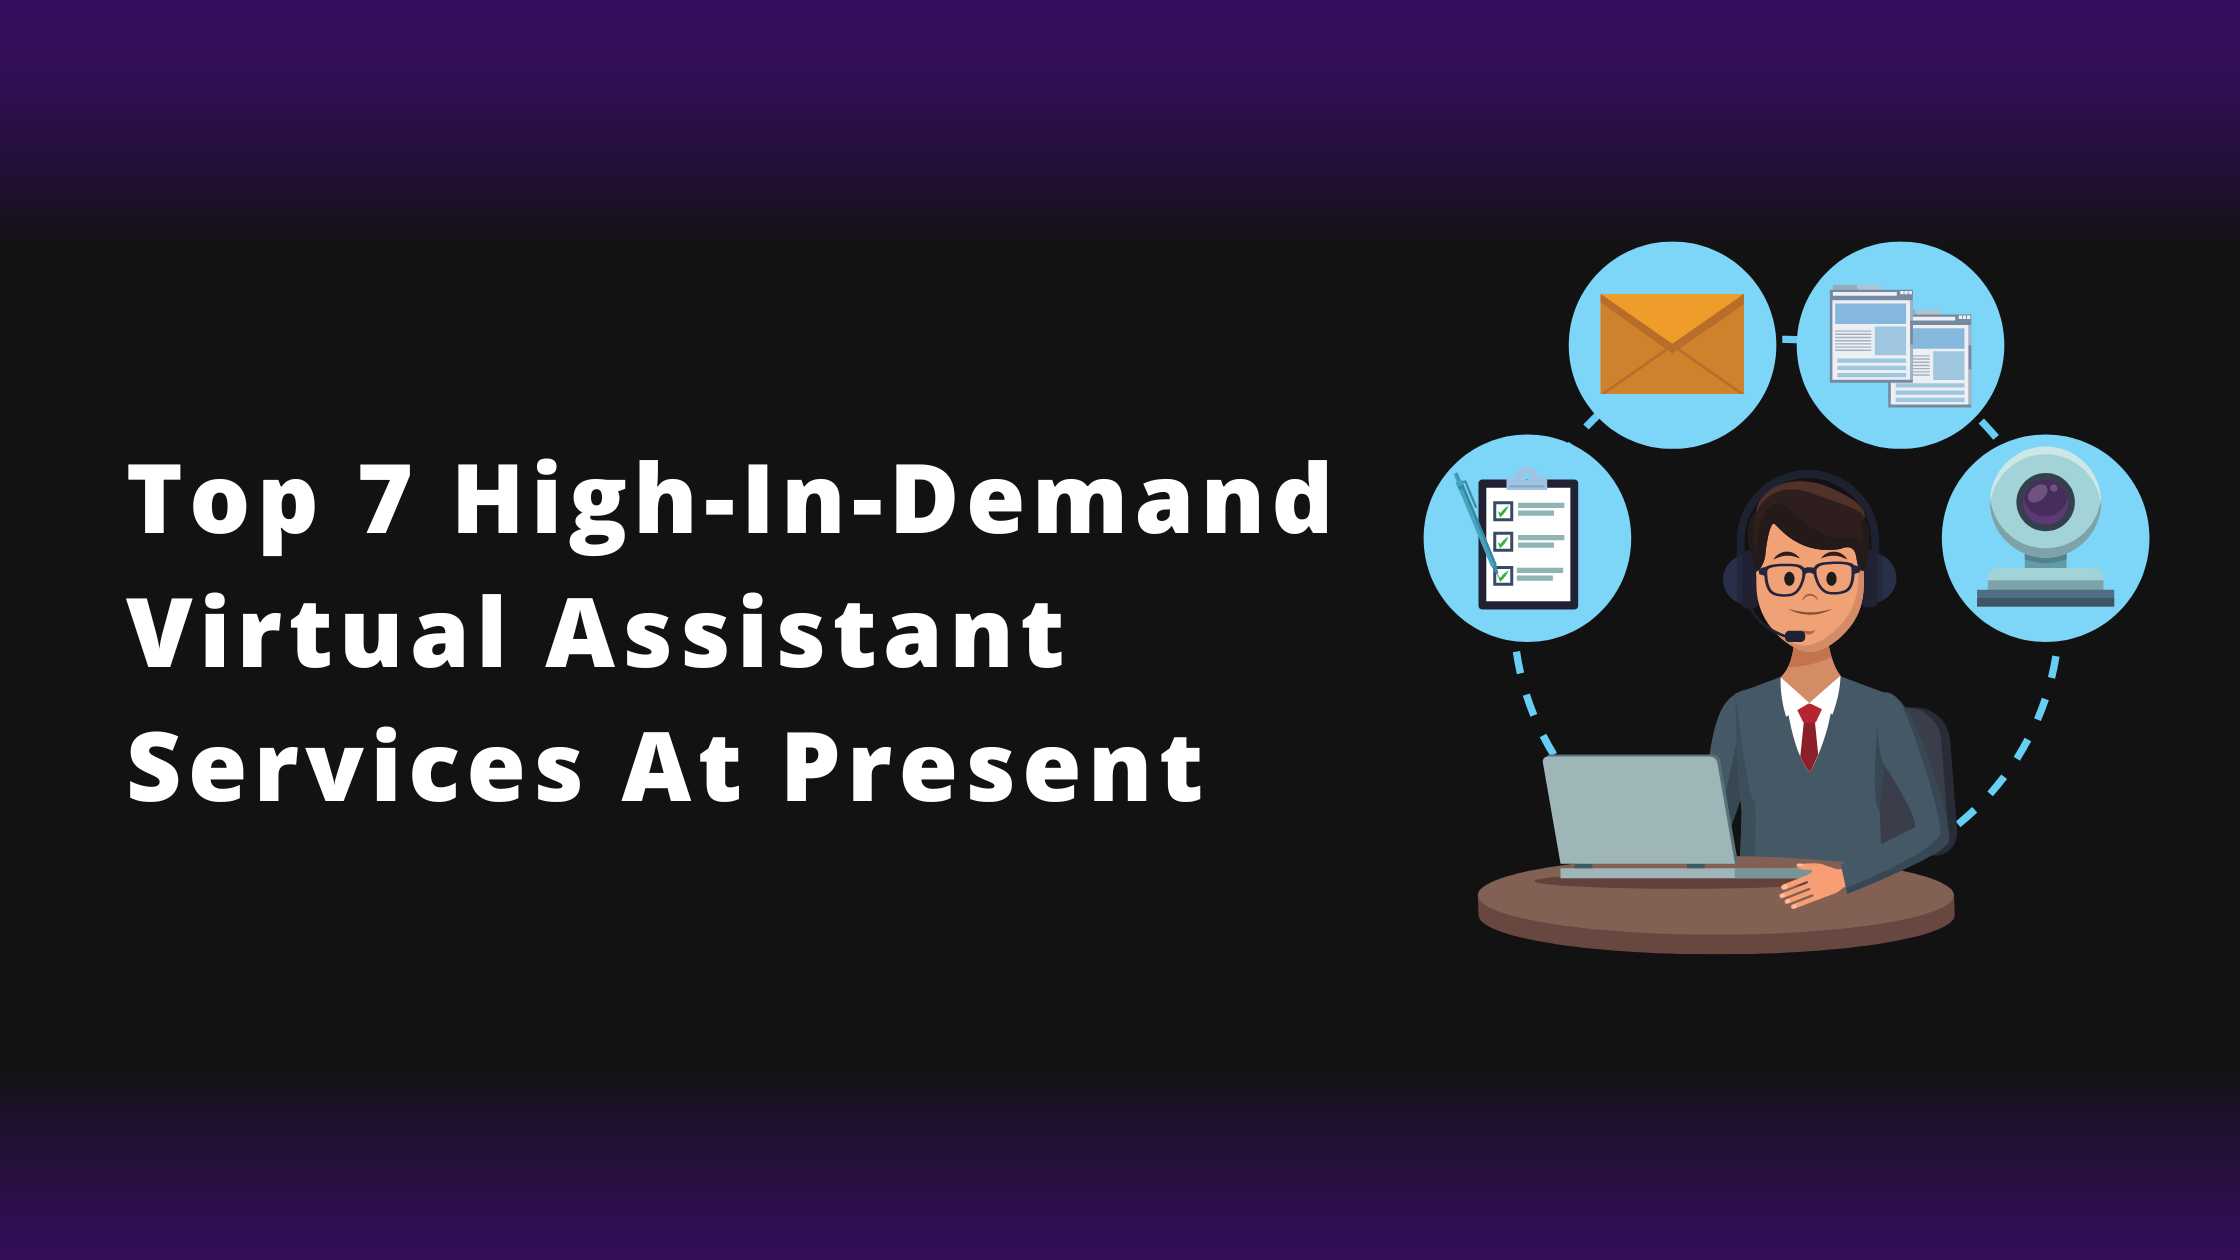 Top 7 high-in-demand Virtual Assistant services at present